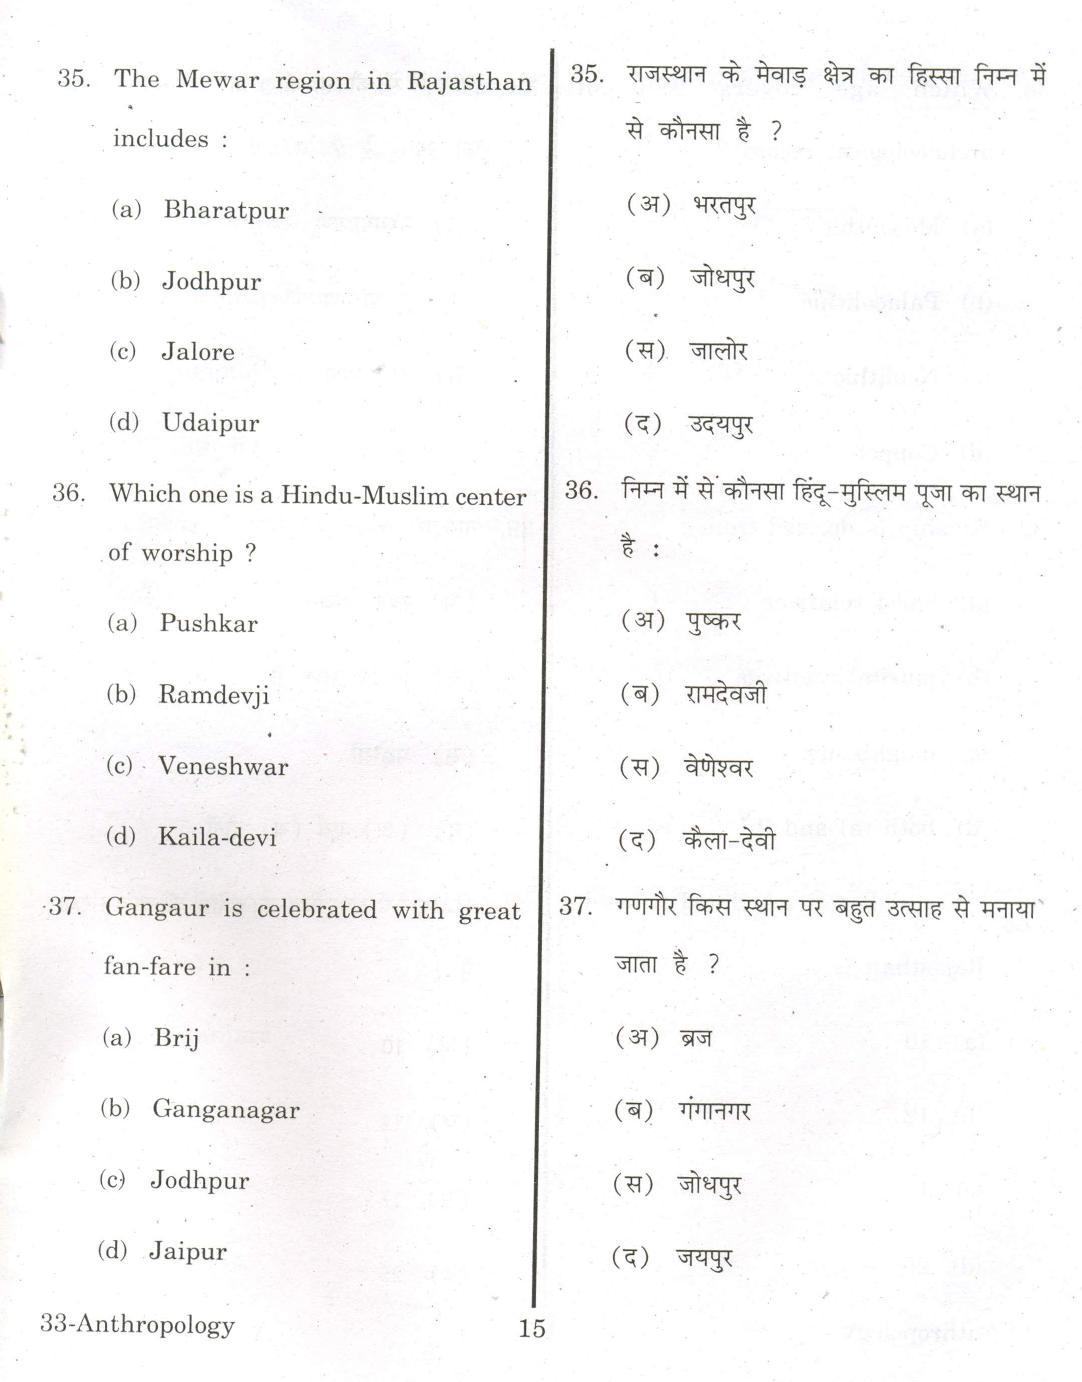 URATPG Anthropology 2013 Question Paper - Page 14